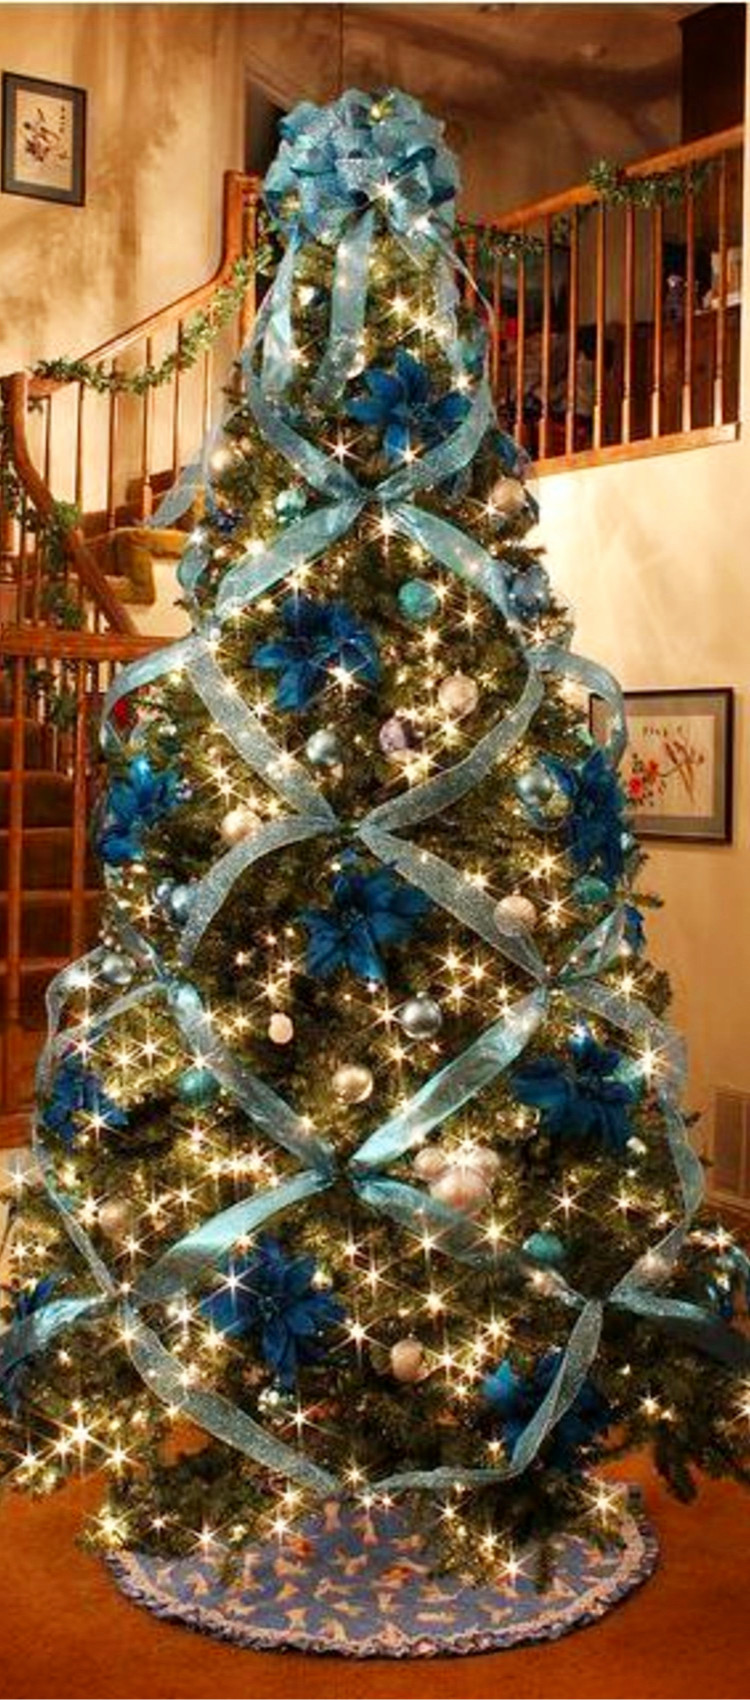 Christmas Tree Ideas - Criss Cross Ribbon when decorating your tree - it's gorgeous!